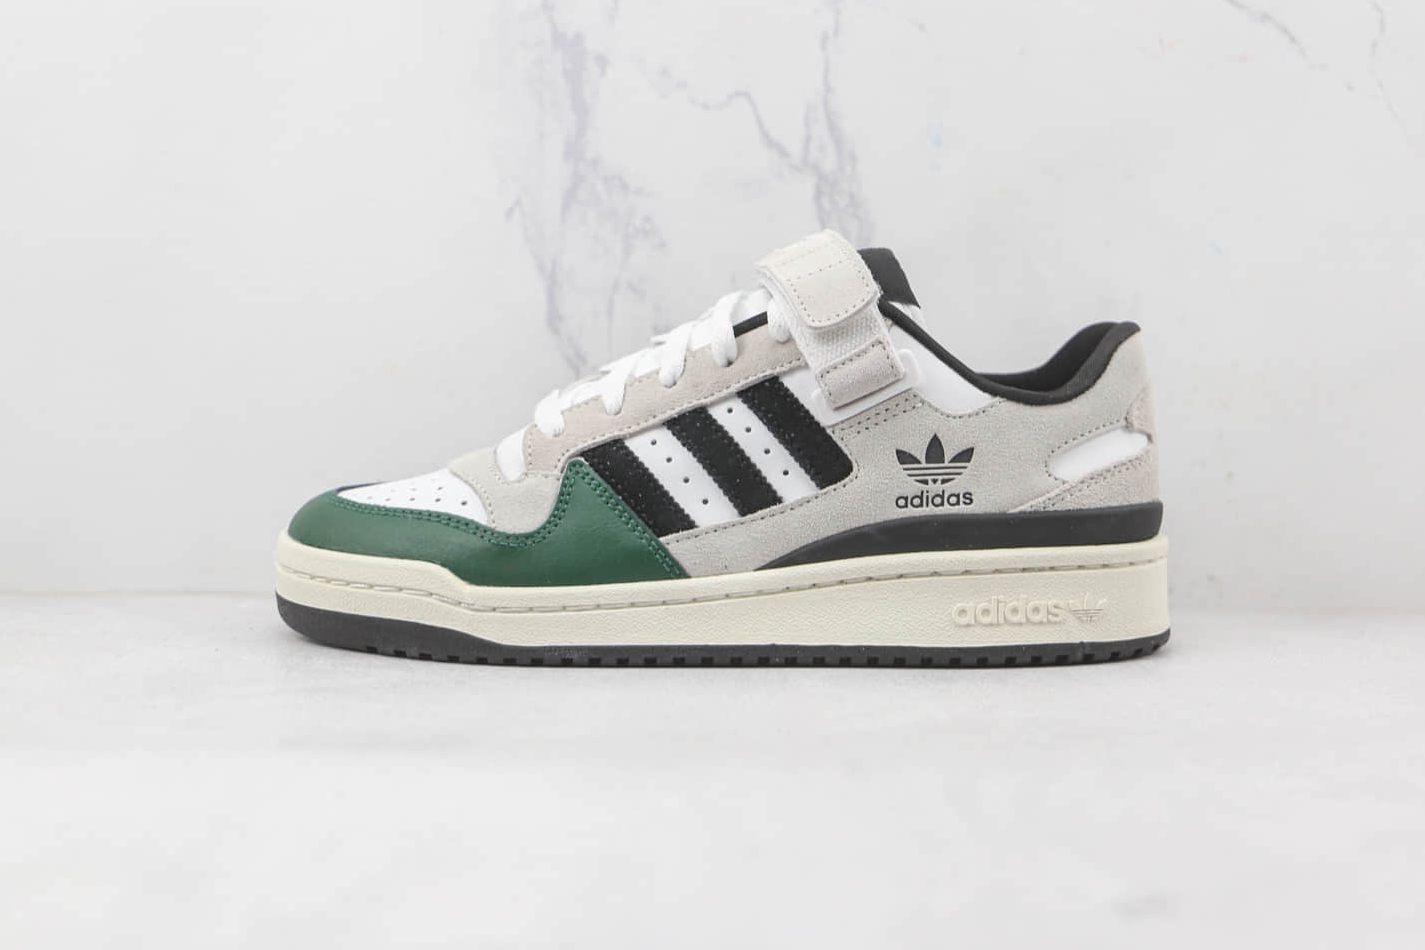 Adidas Originals Forum Low GY8203 - Trendy and Classic Sneakers